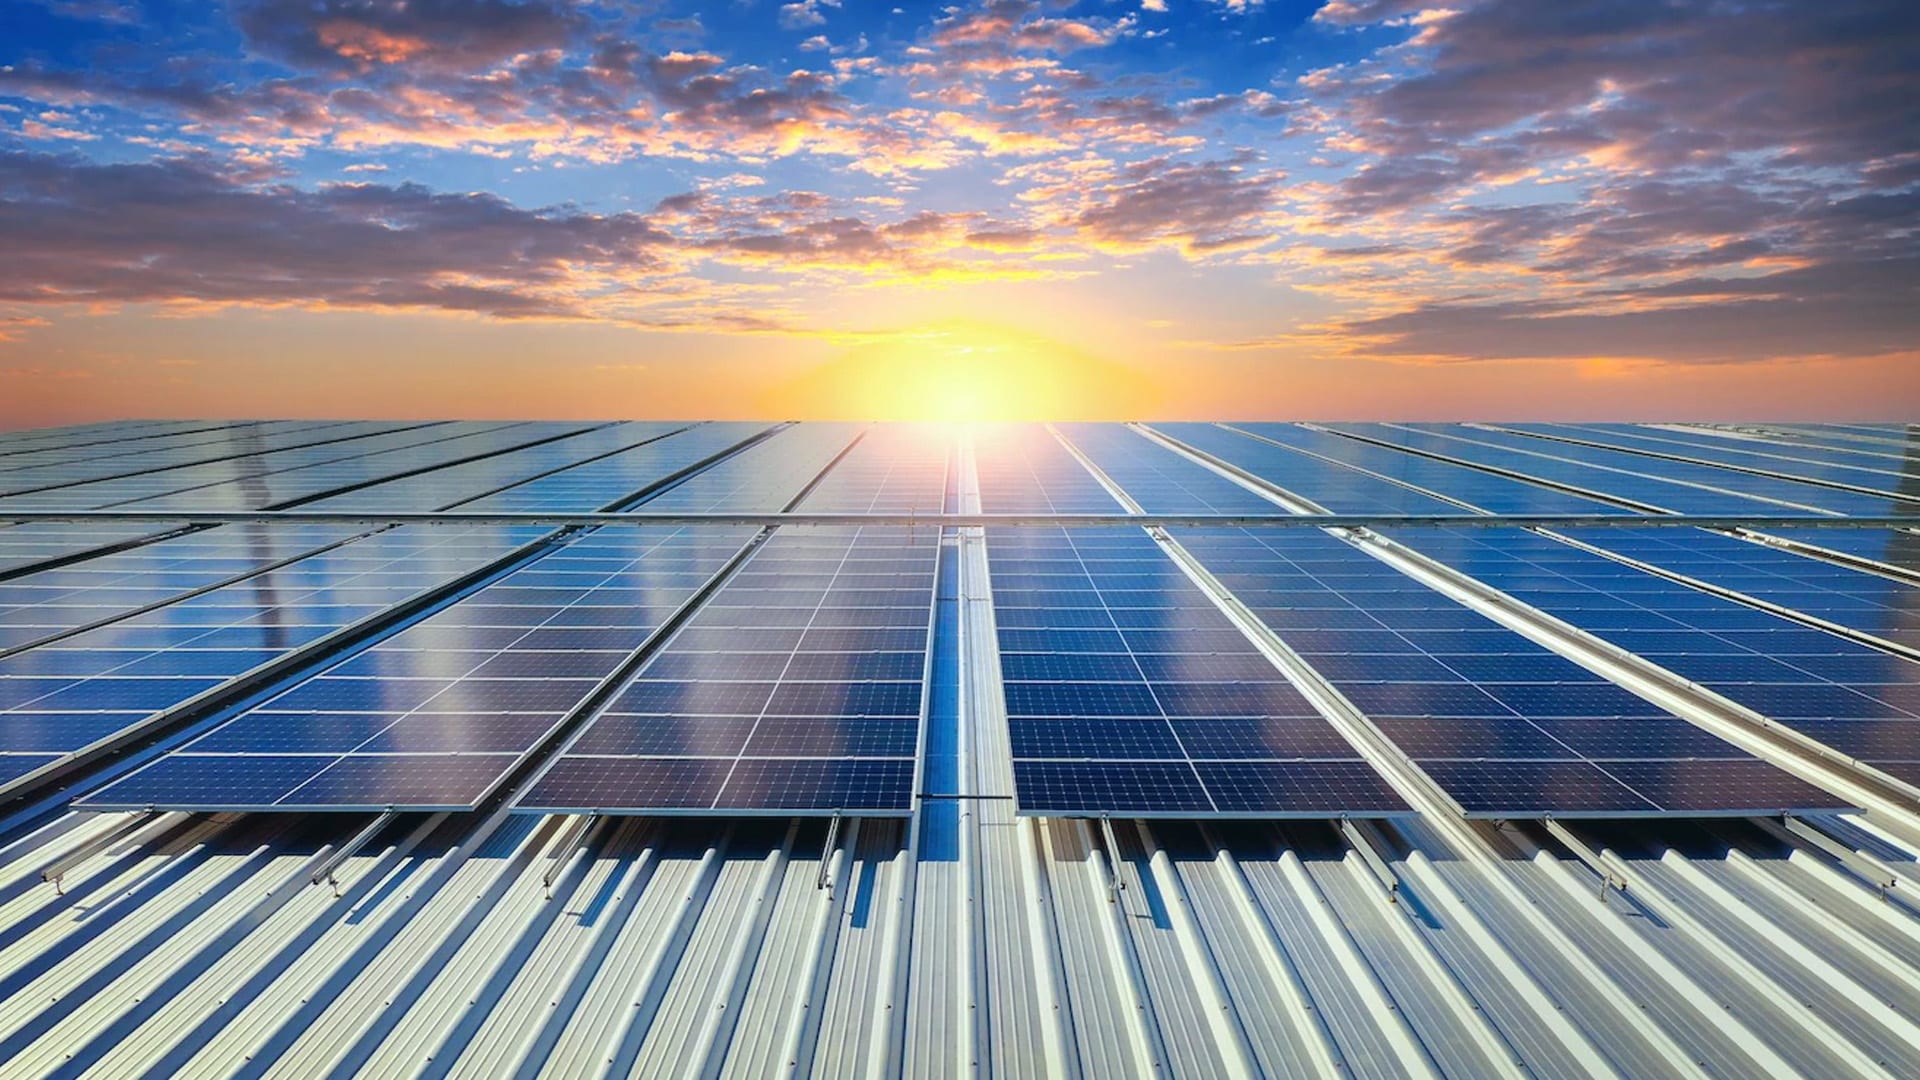 Corporate funding in global solar sector falls 13% to USD 24.1 billion in 2022: Report